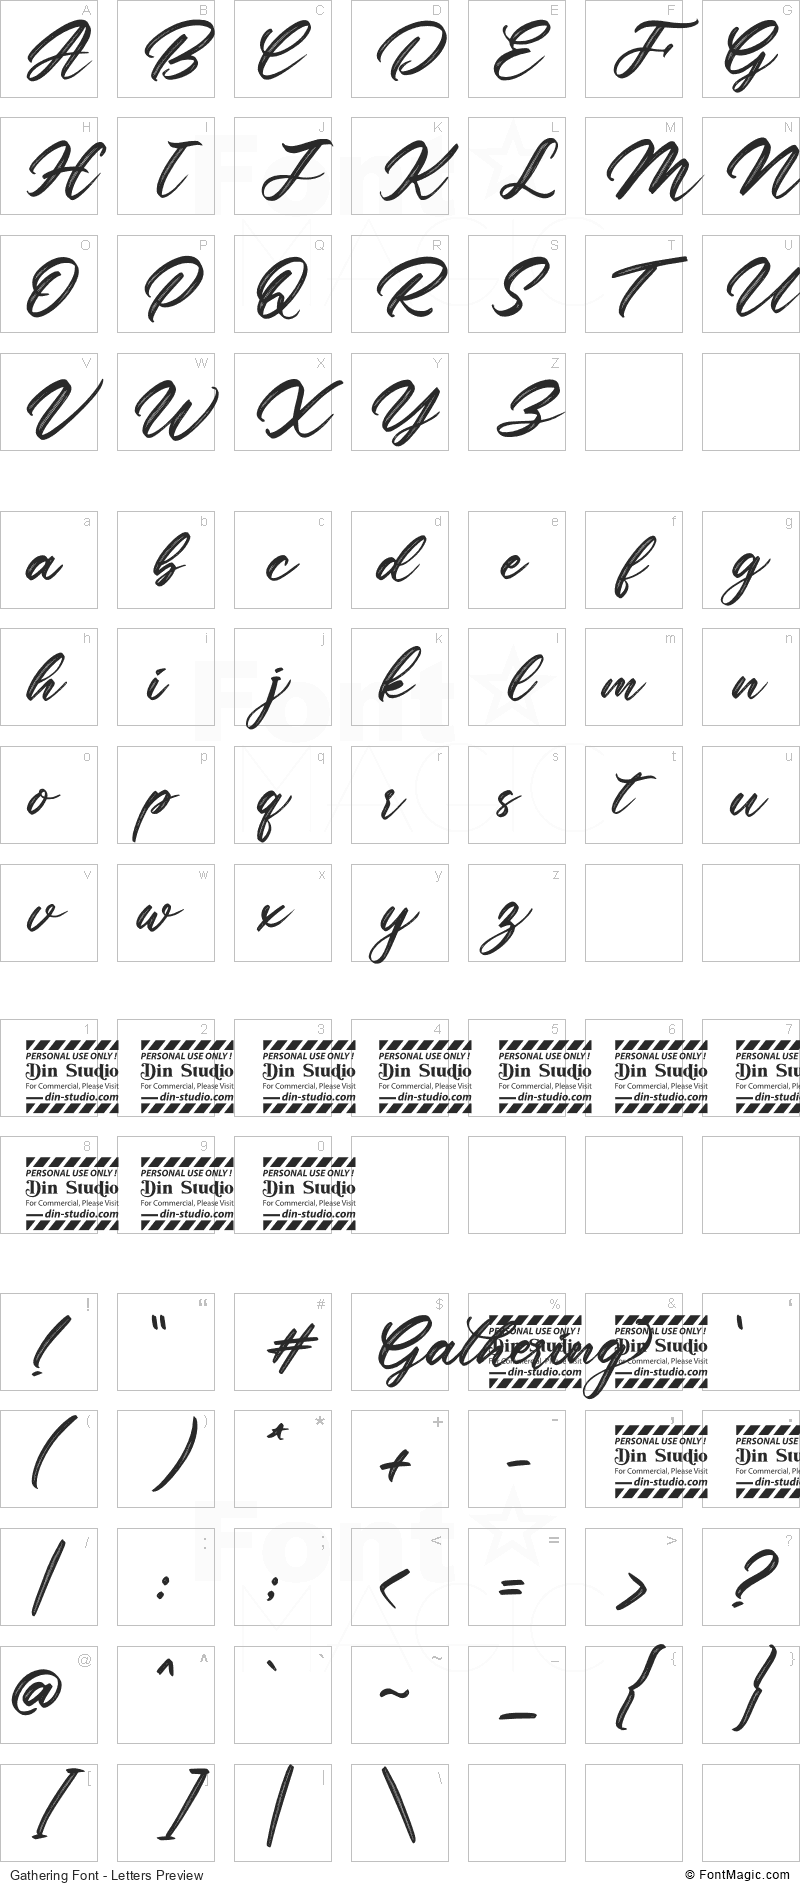 Gathering Font - All Latters Preview Chart